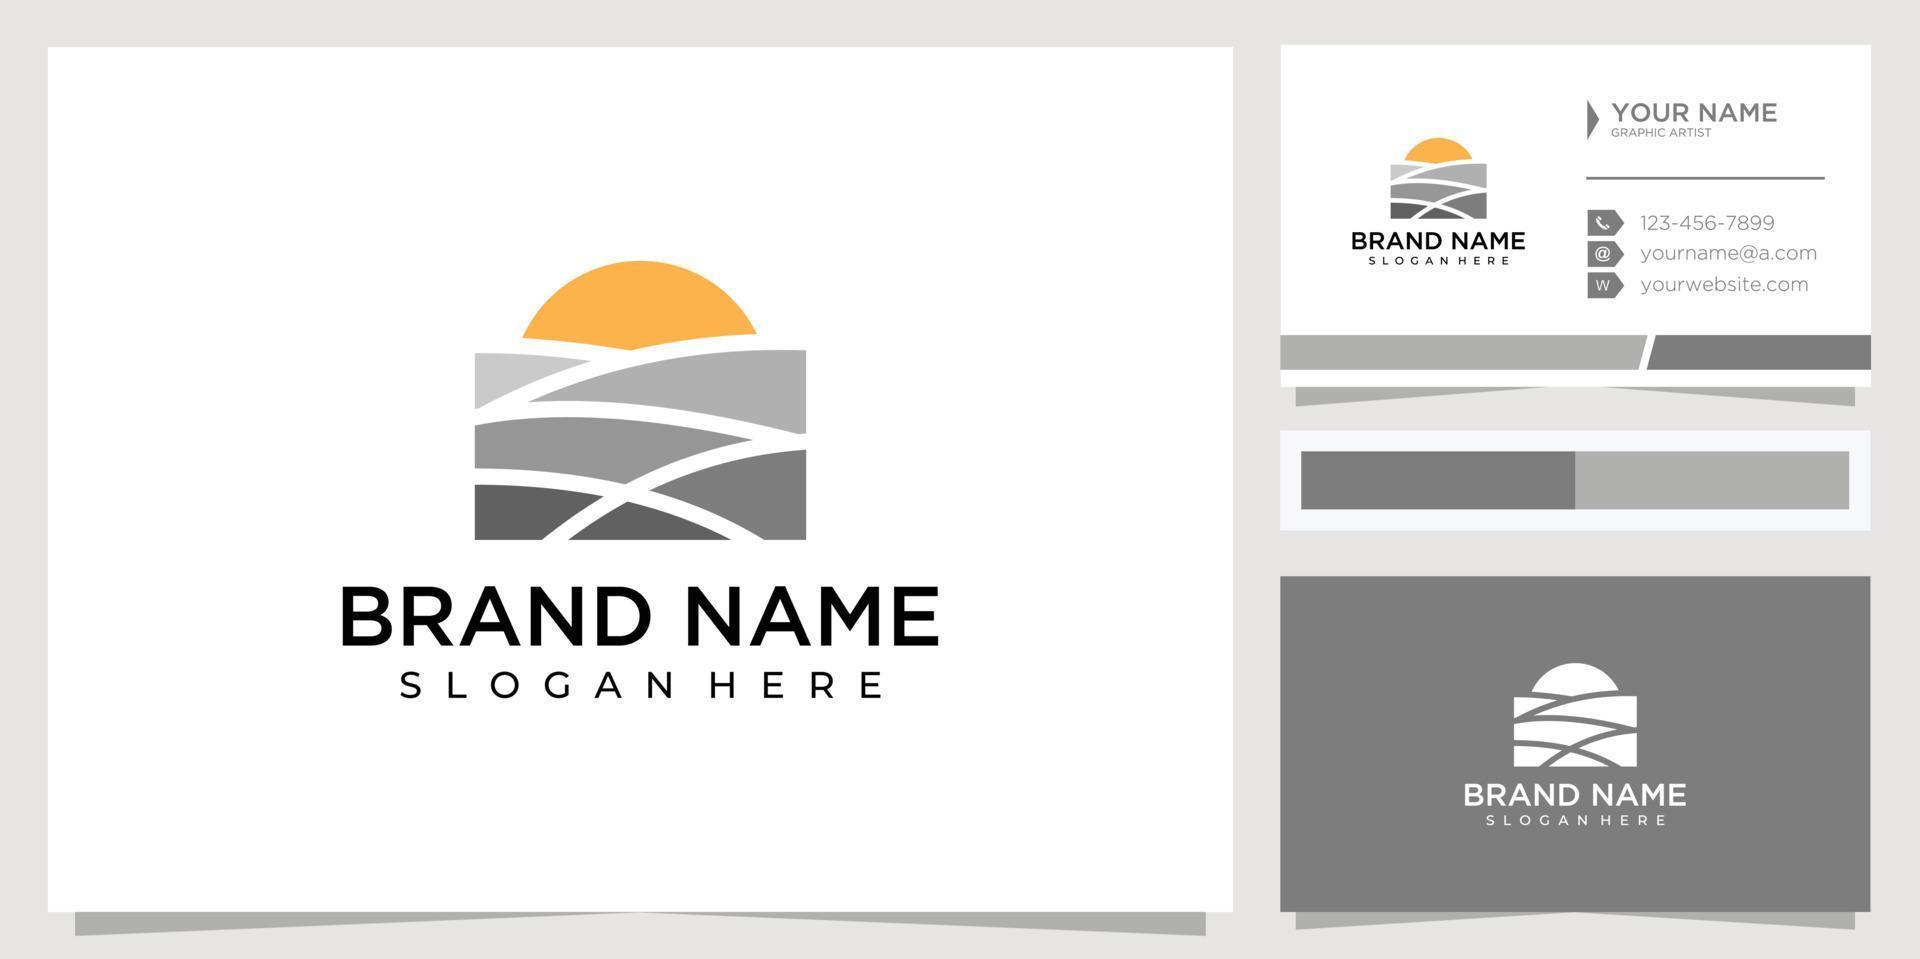 sun logo icon design template vector illustration with business card